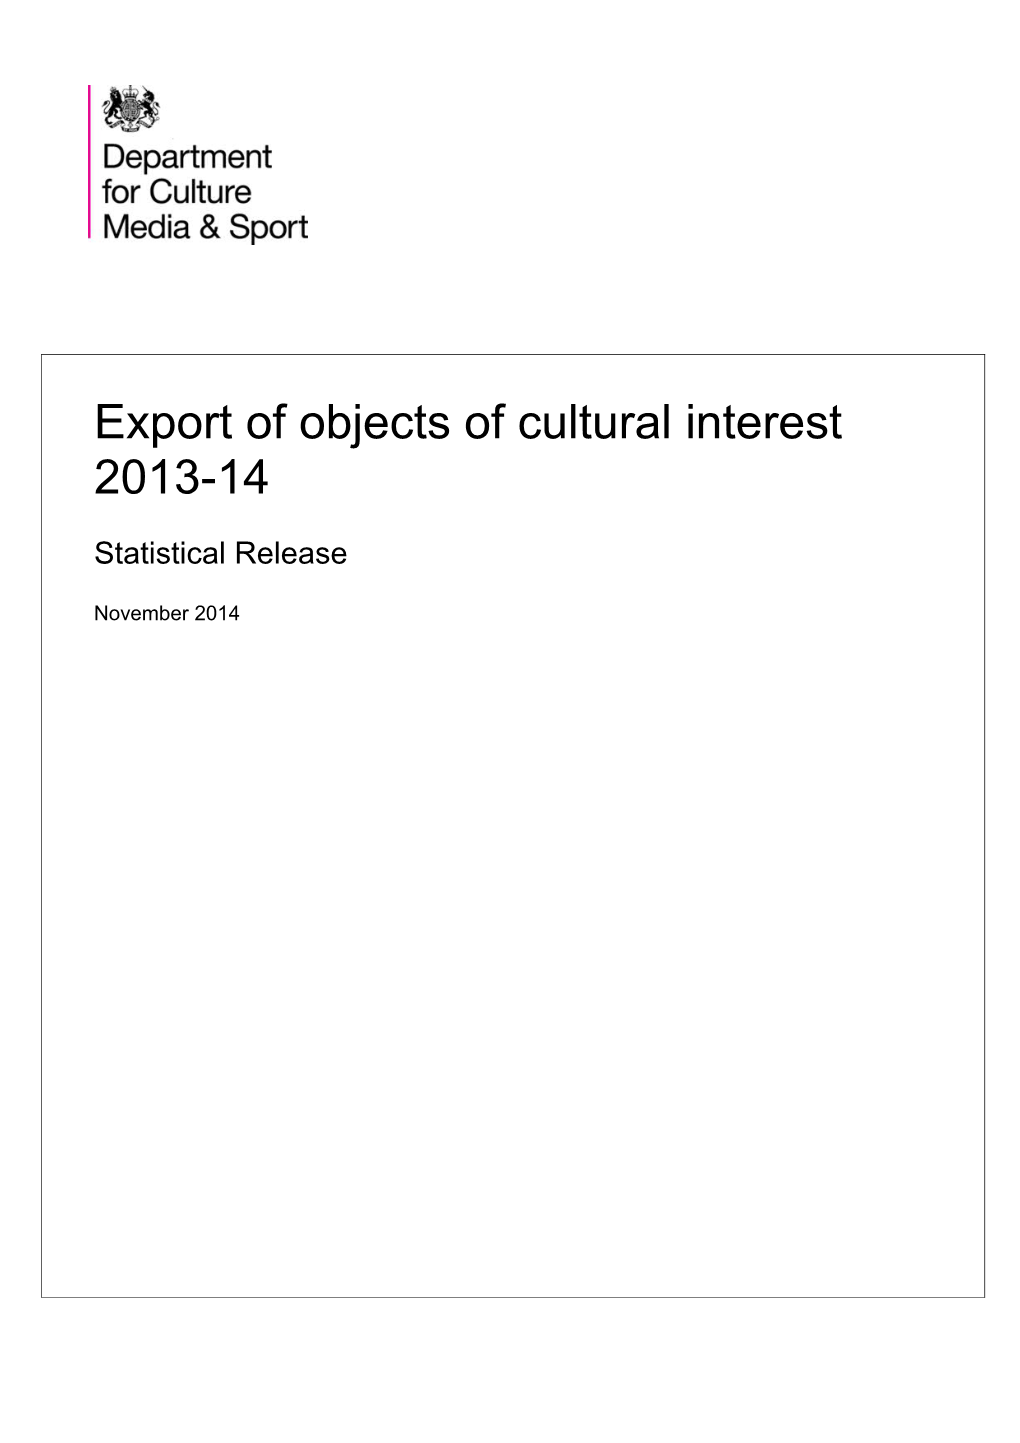 Export of Objects of Cultural Interest Is an Official Statistic and Has Been Produced